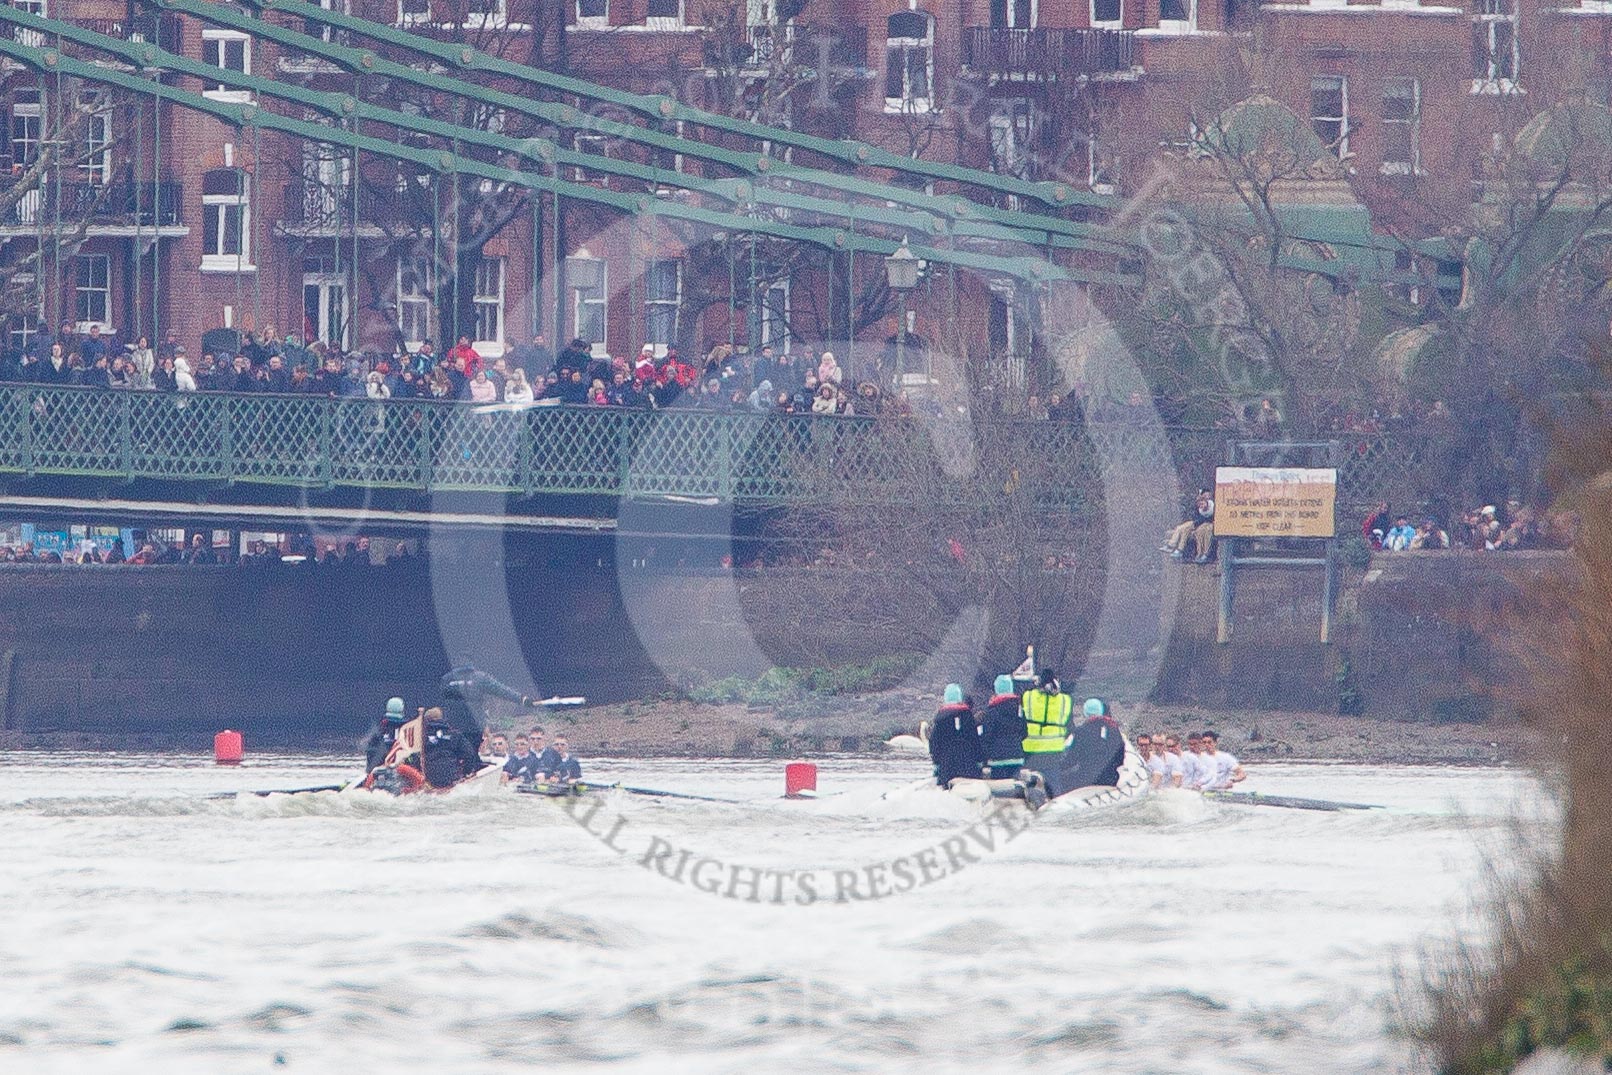 The Boat Race 2013.
Putney,
London SW15,

United Kingdom,
on 31 March 2013 at 16:04, image #214